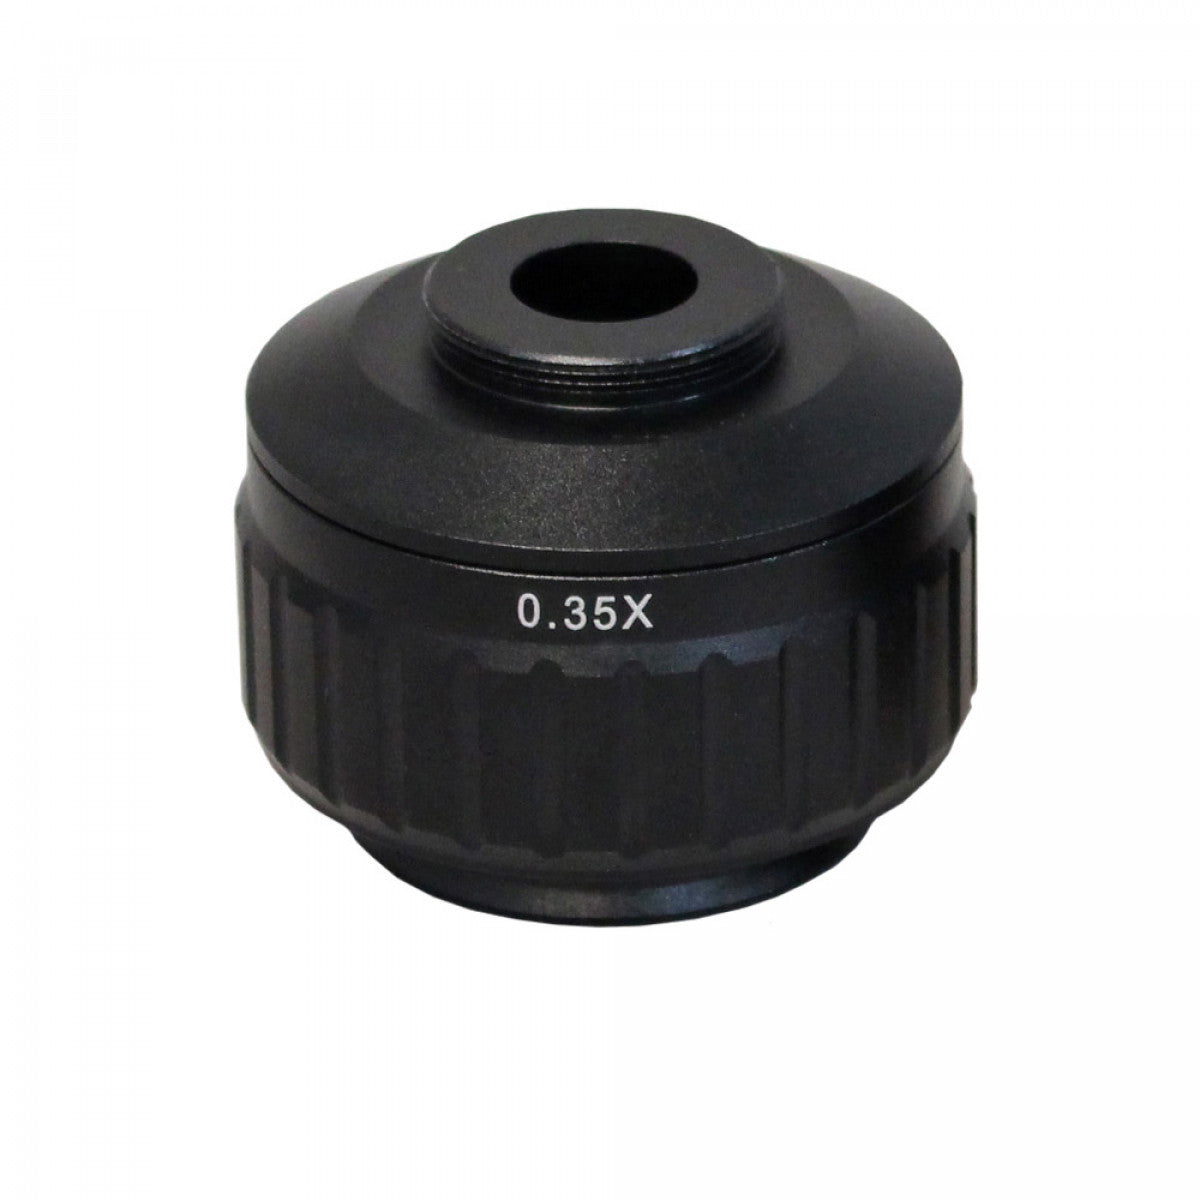 C-Mount Adapers For Accu-Scope 3000-LED